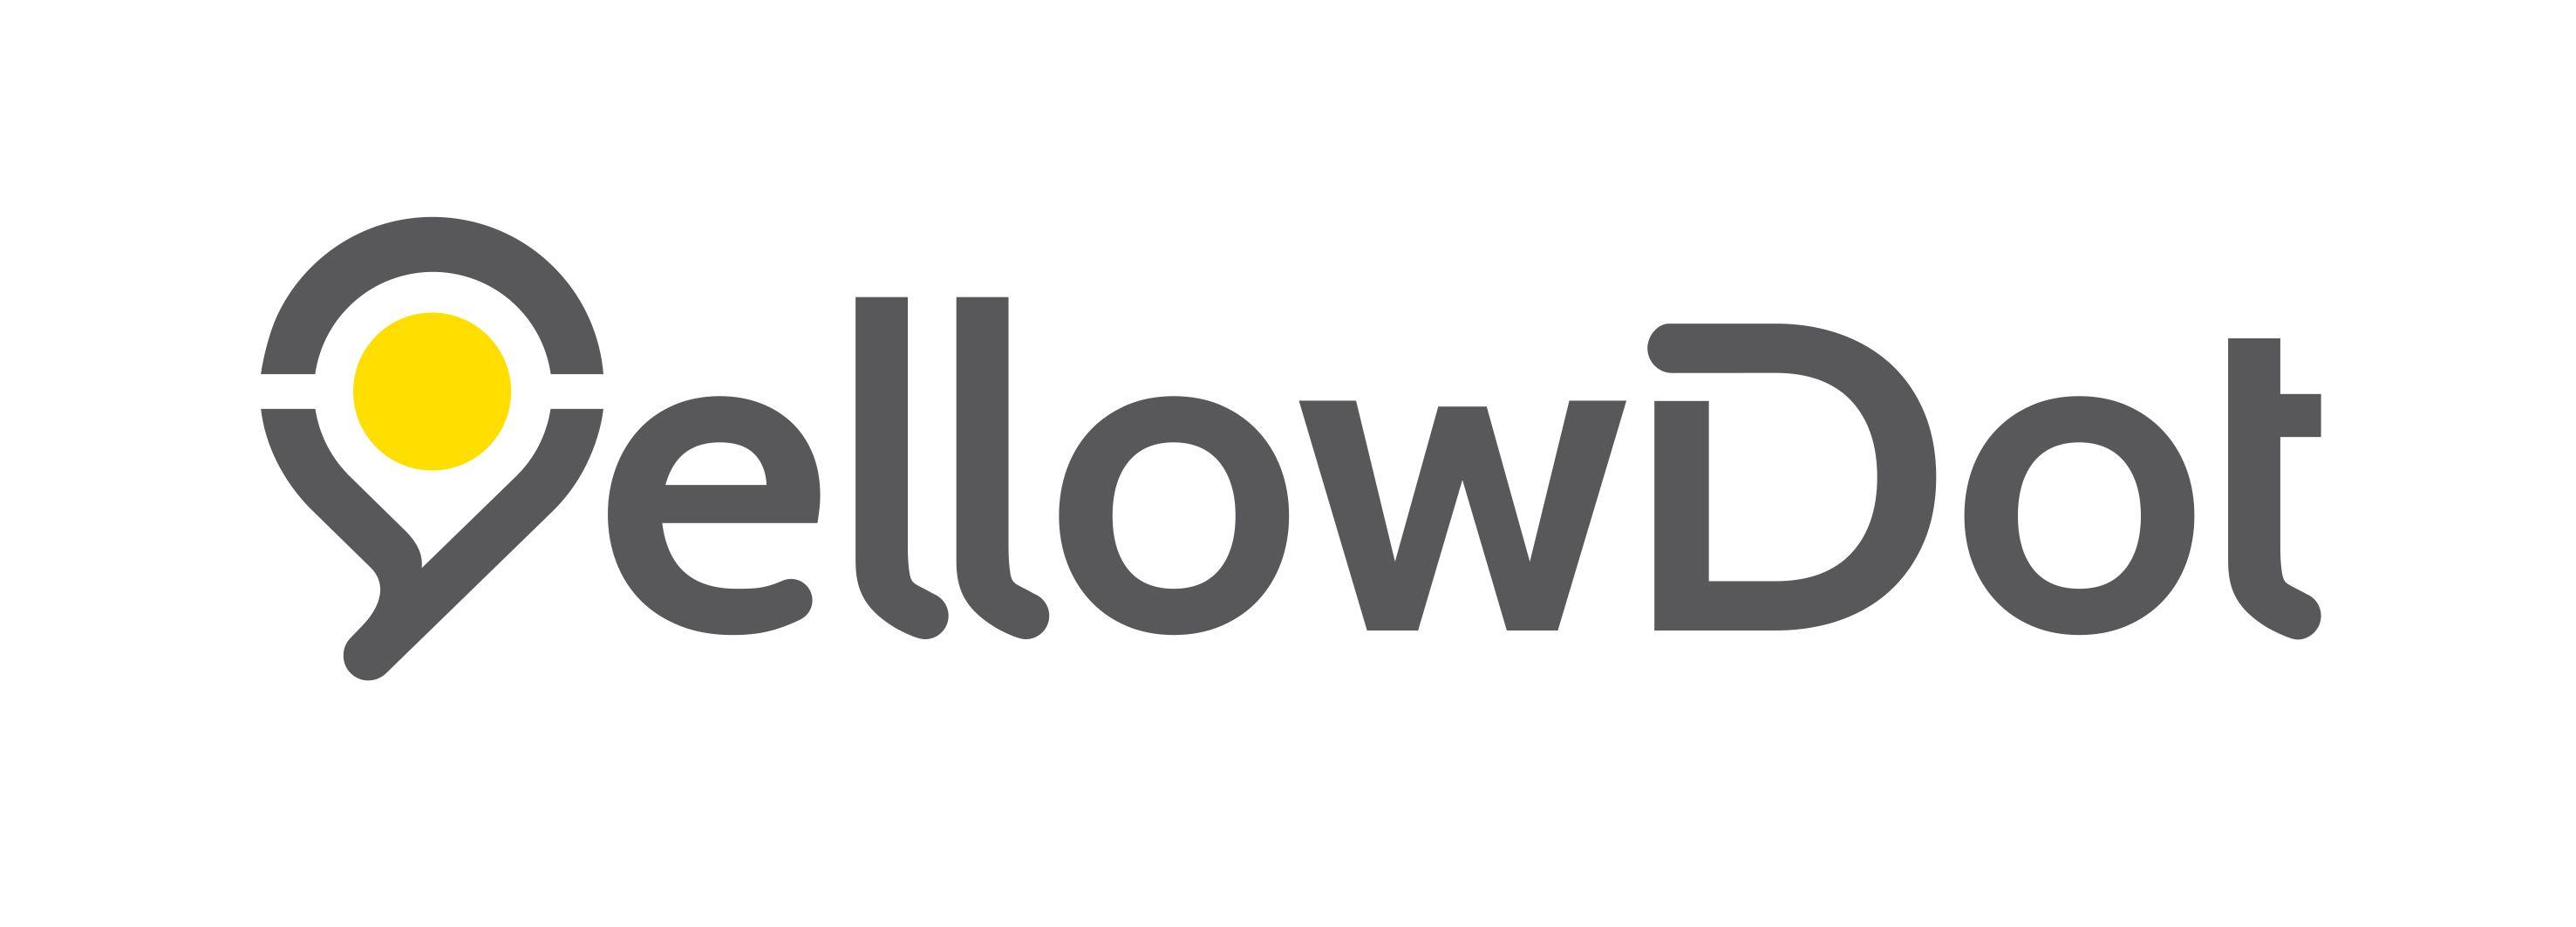 Yellow Dot Logo - Philips Lighting opens its indoor positioning technology to other